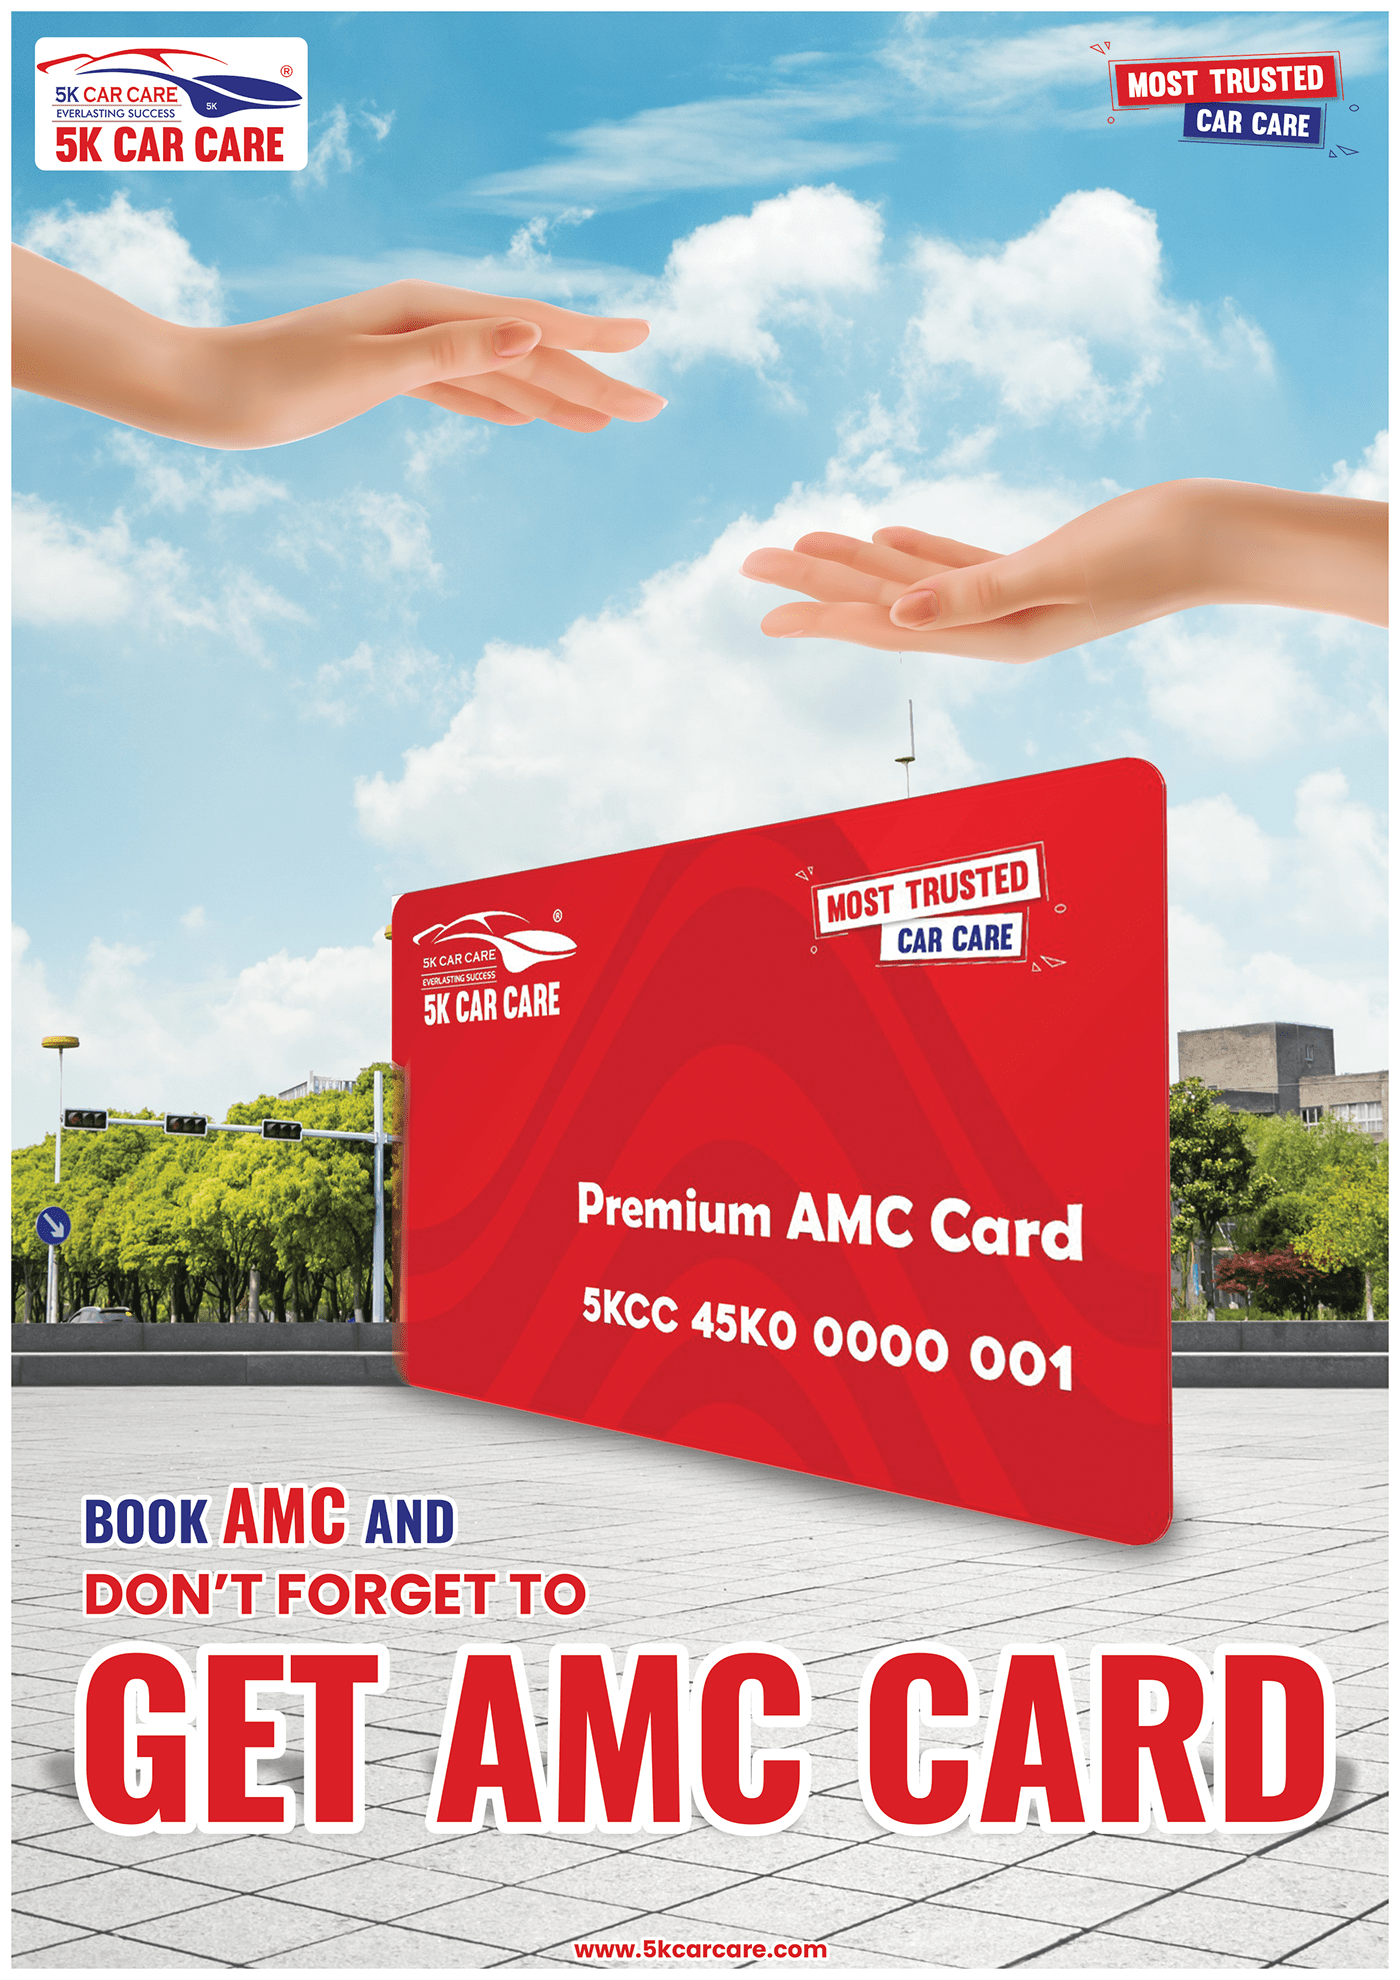 ATM card business brand identity corporate marketing   Advertising  offer Promotion graphic design 